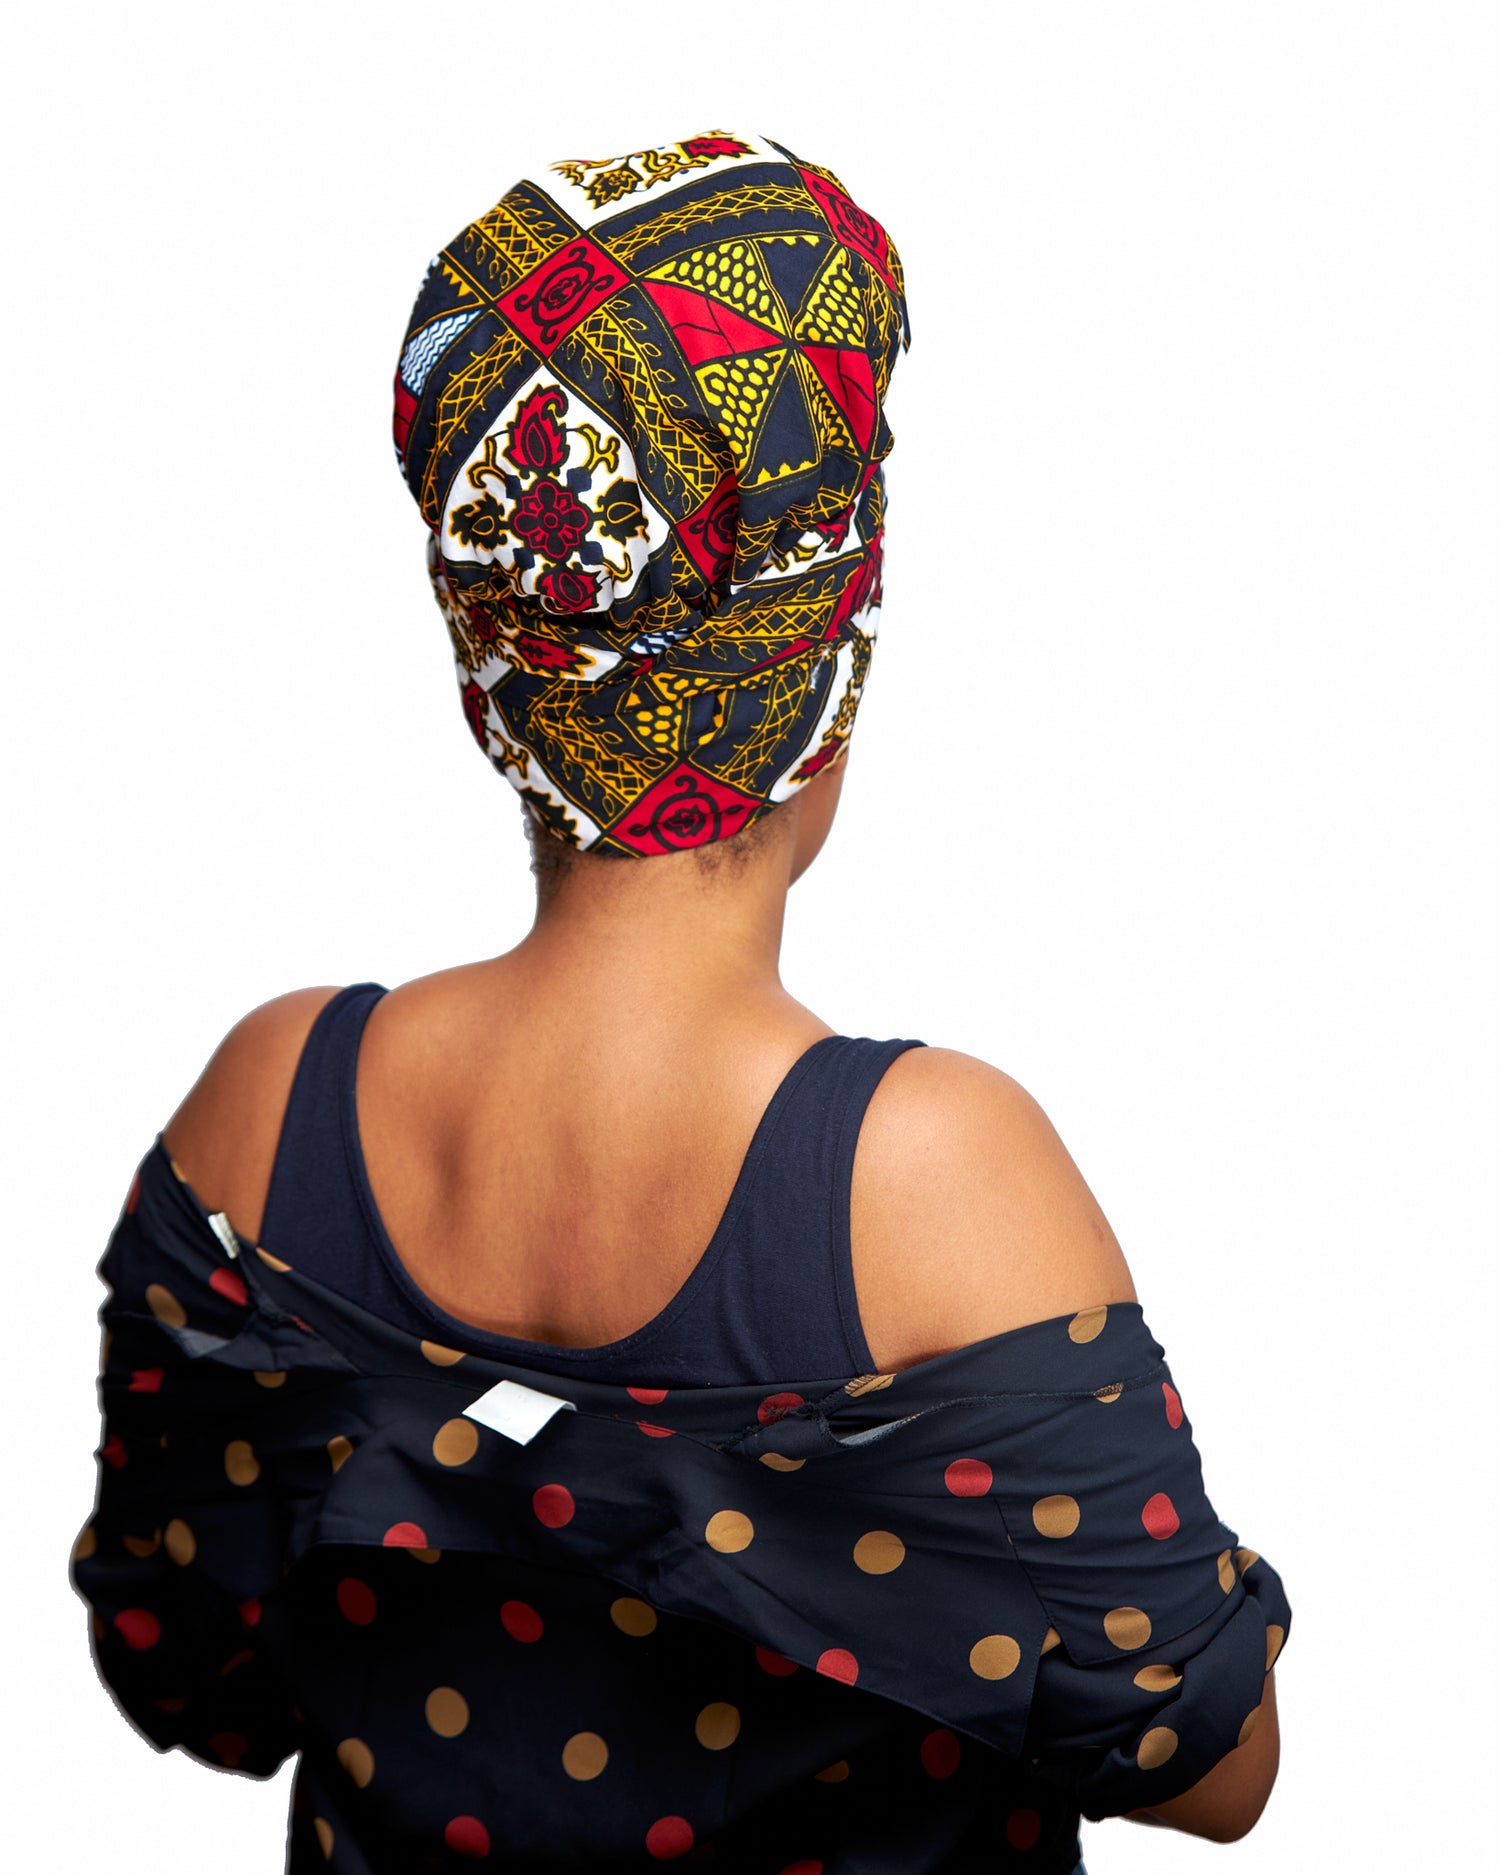 Ankara Wax Print Made of Red, Blue, Gold, Black And White Blended Beautiful Colours And Pattern, Hand Made Elastic Silklined Bonnet With Band